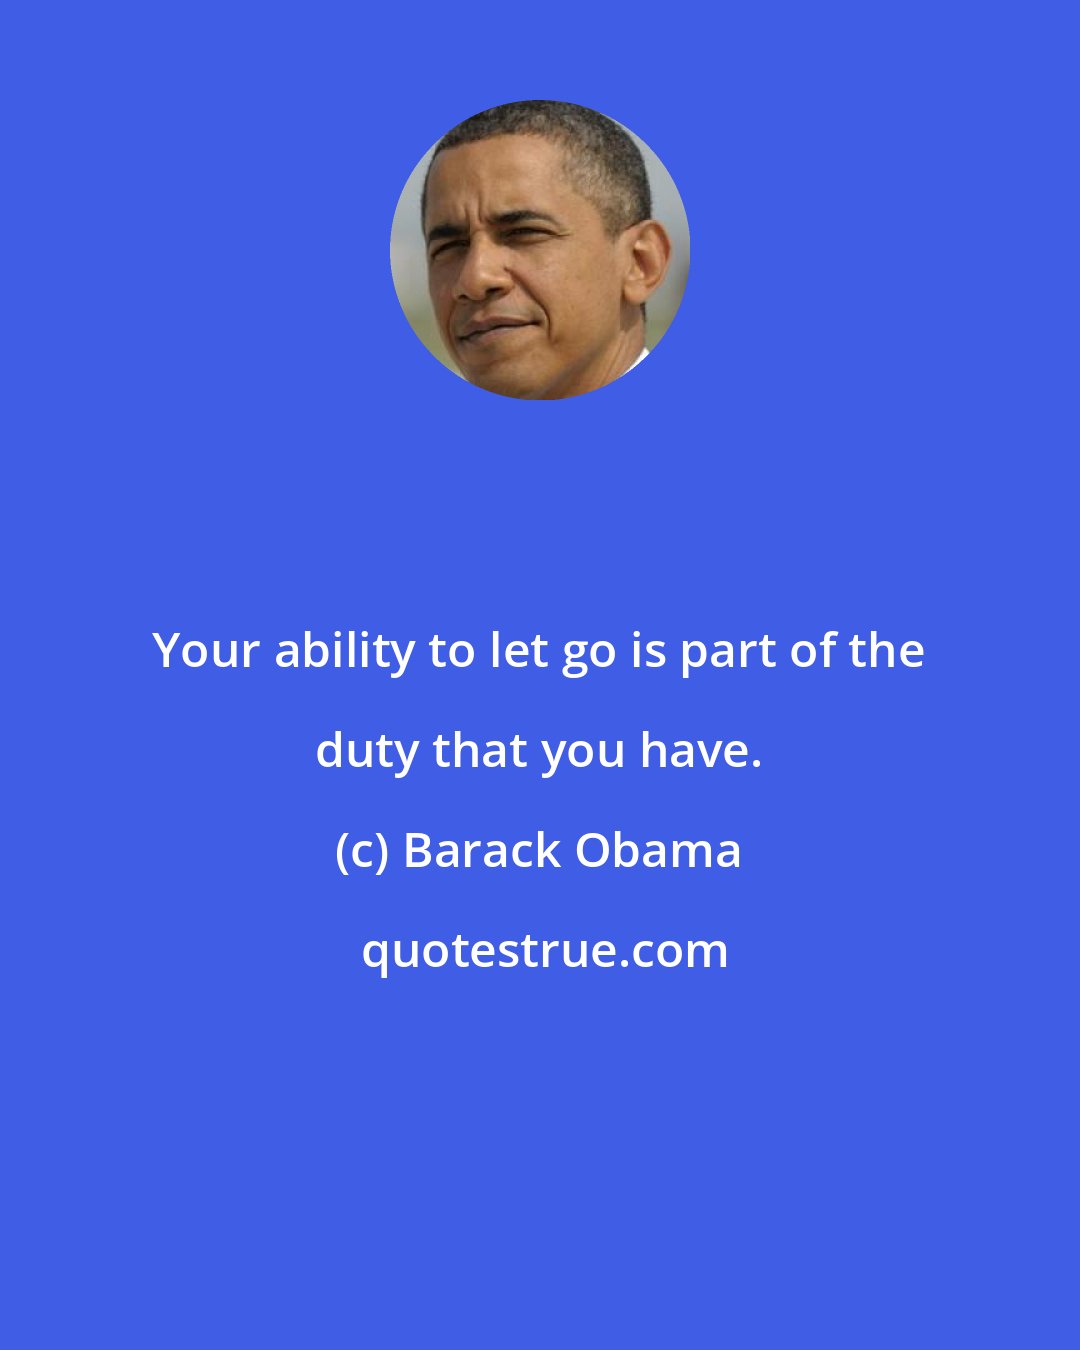 Barack Obama: Your ability to let go is part of the duty that you have.